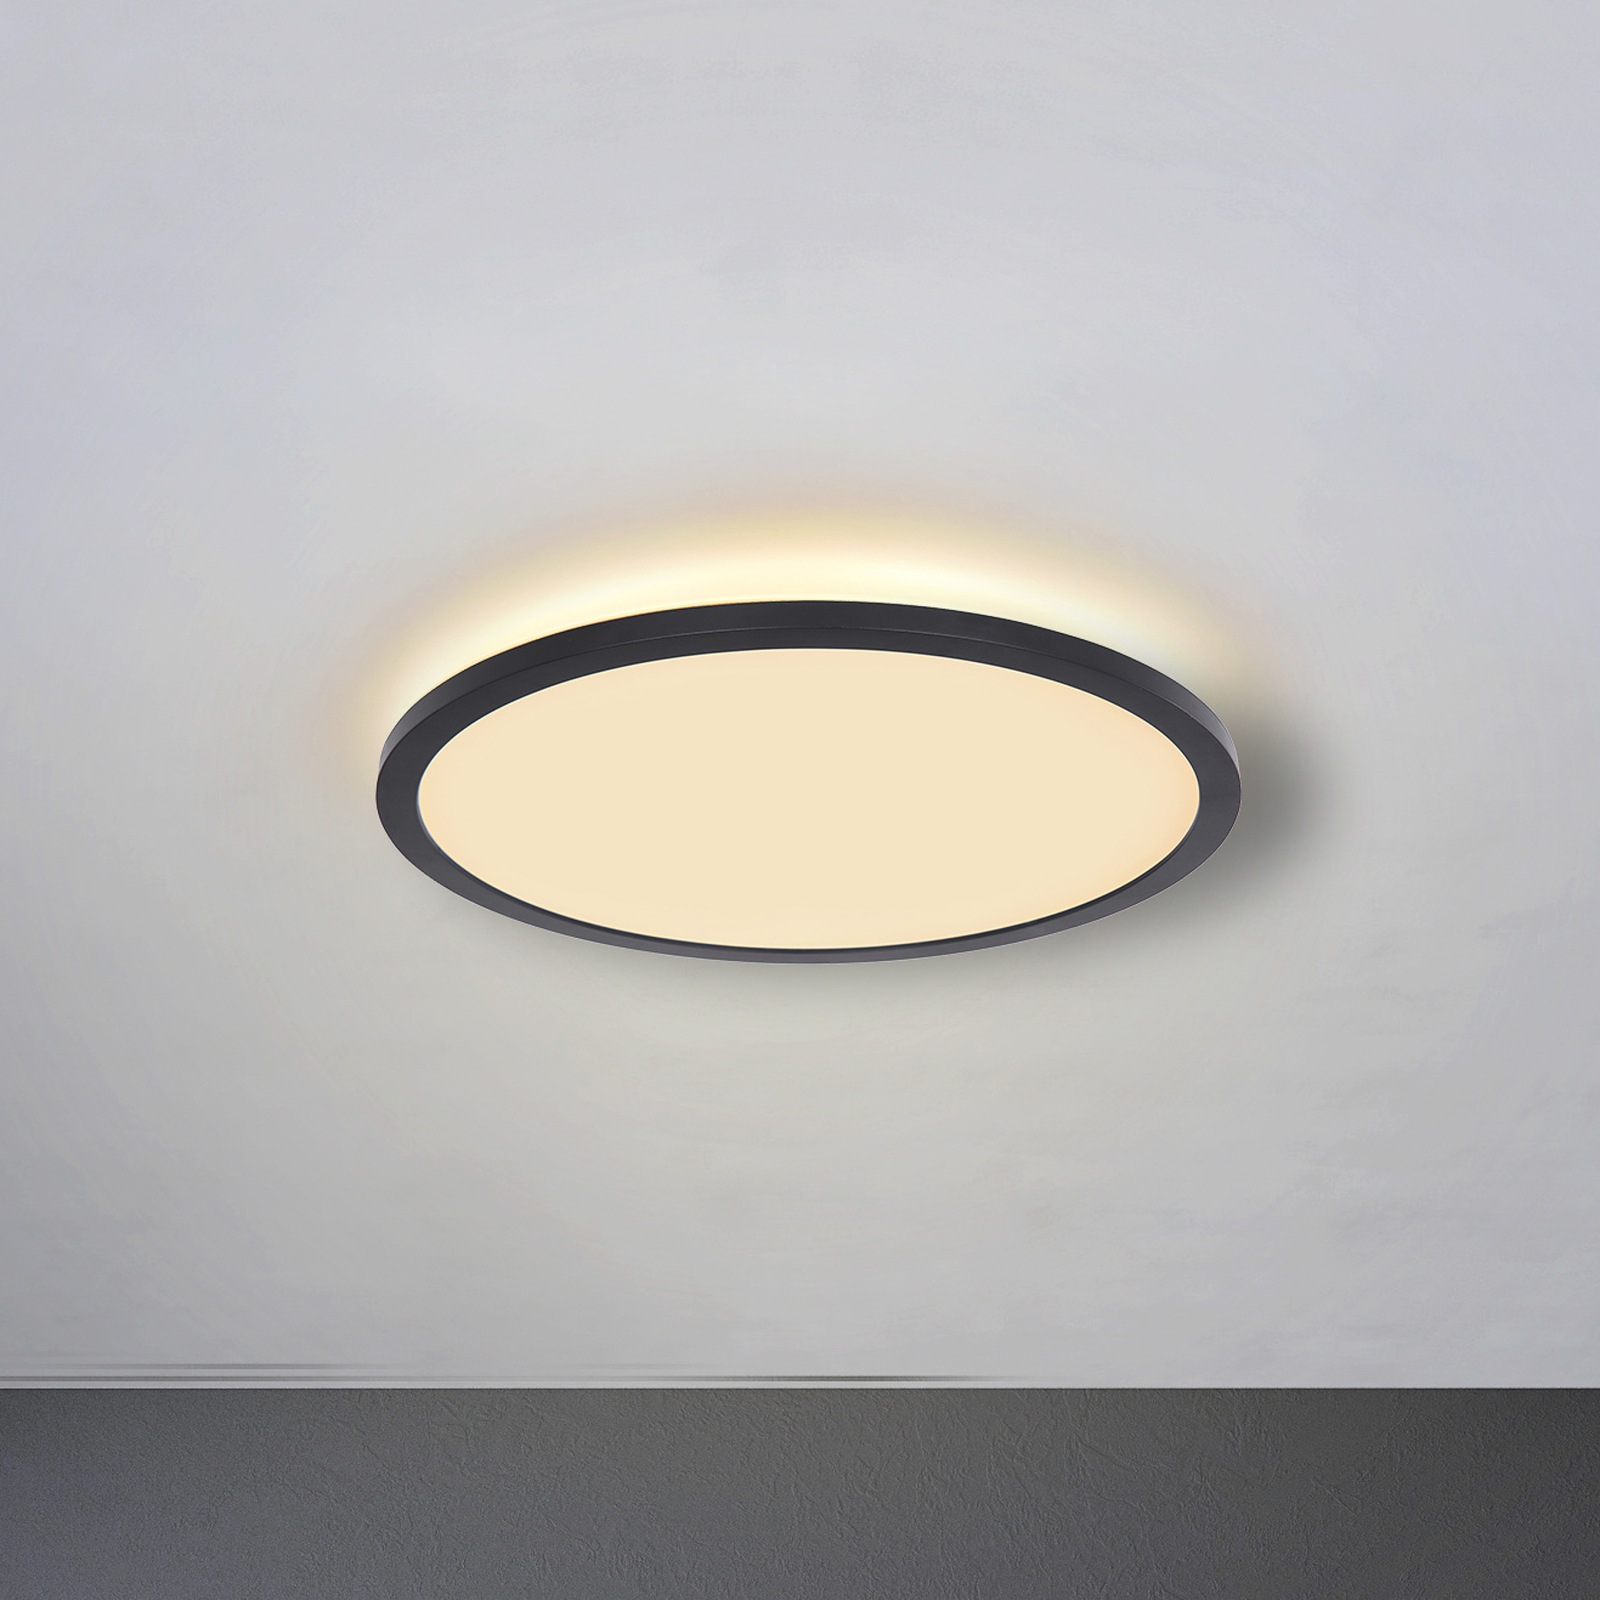 Sapana LED ceiling light, black, round, dimmable